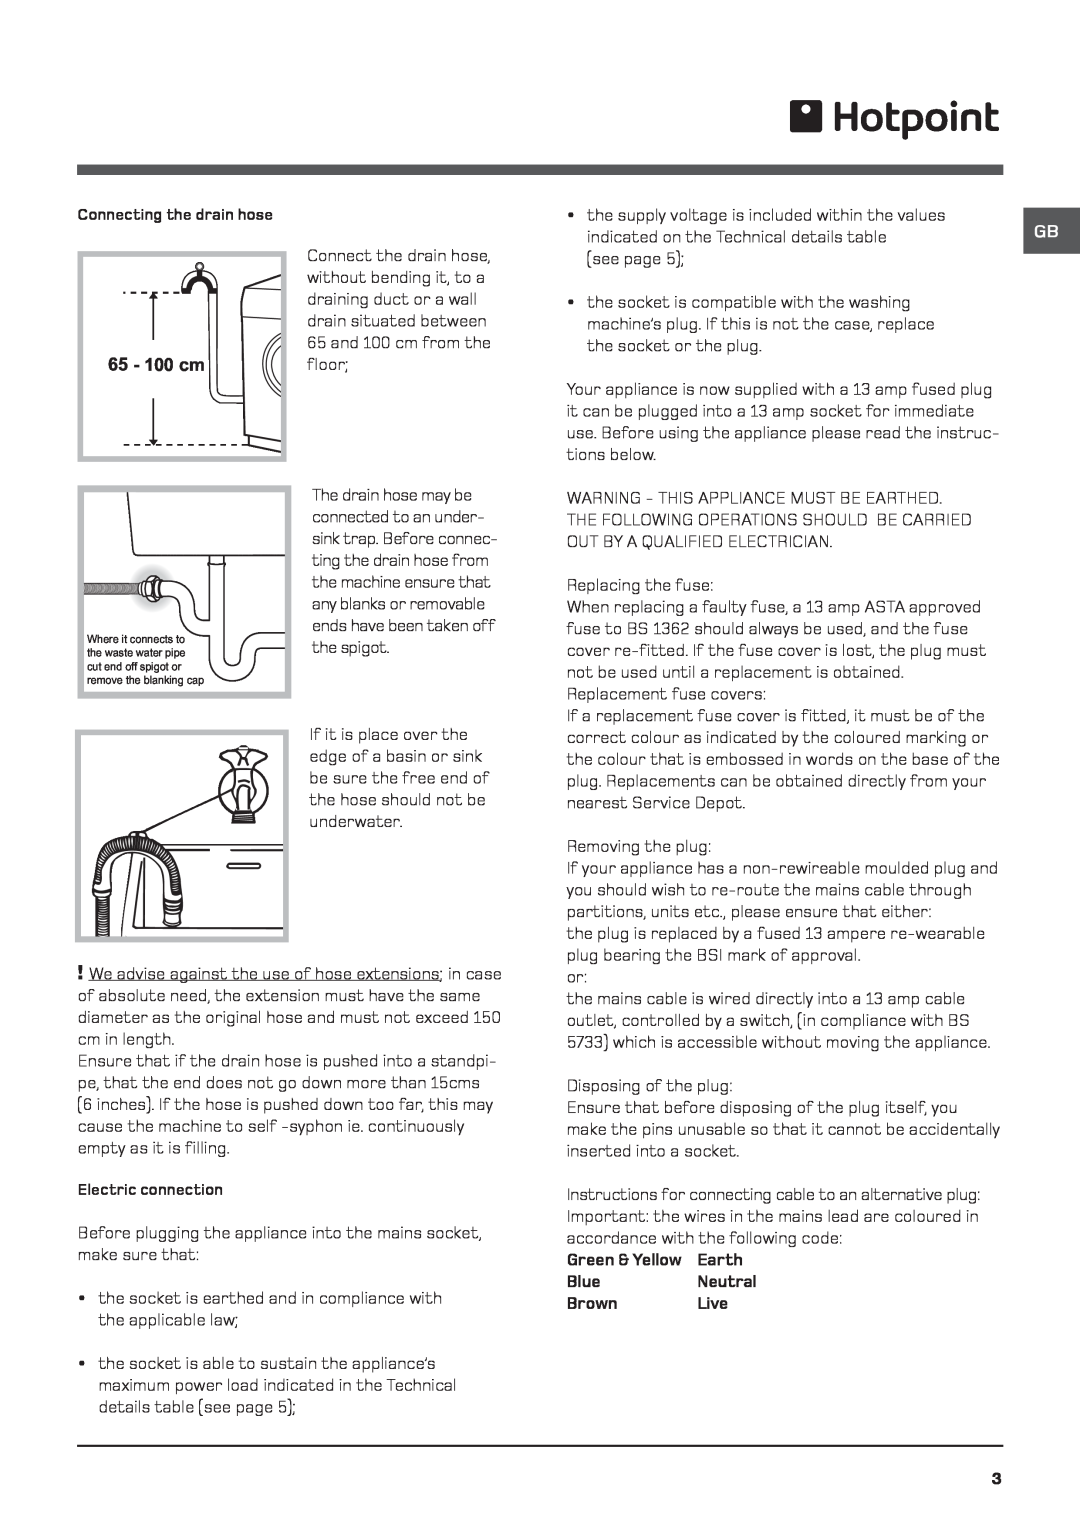 Hotpoint WDD instruction manual 65 - 100 cm, Earth, Blue, Brown, Live 